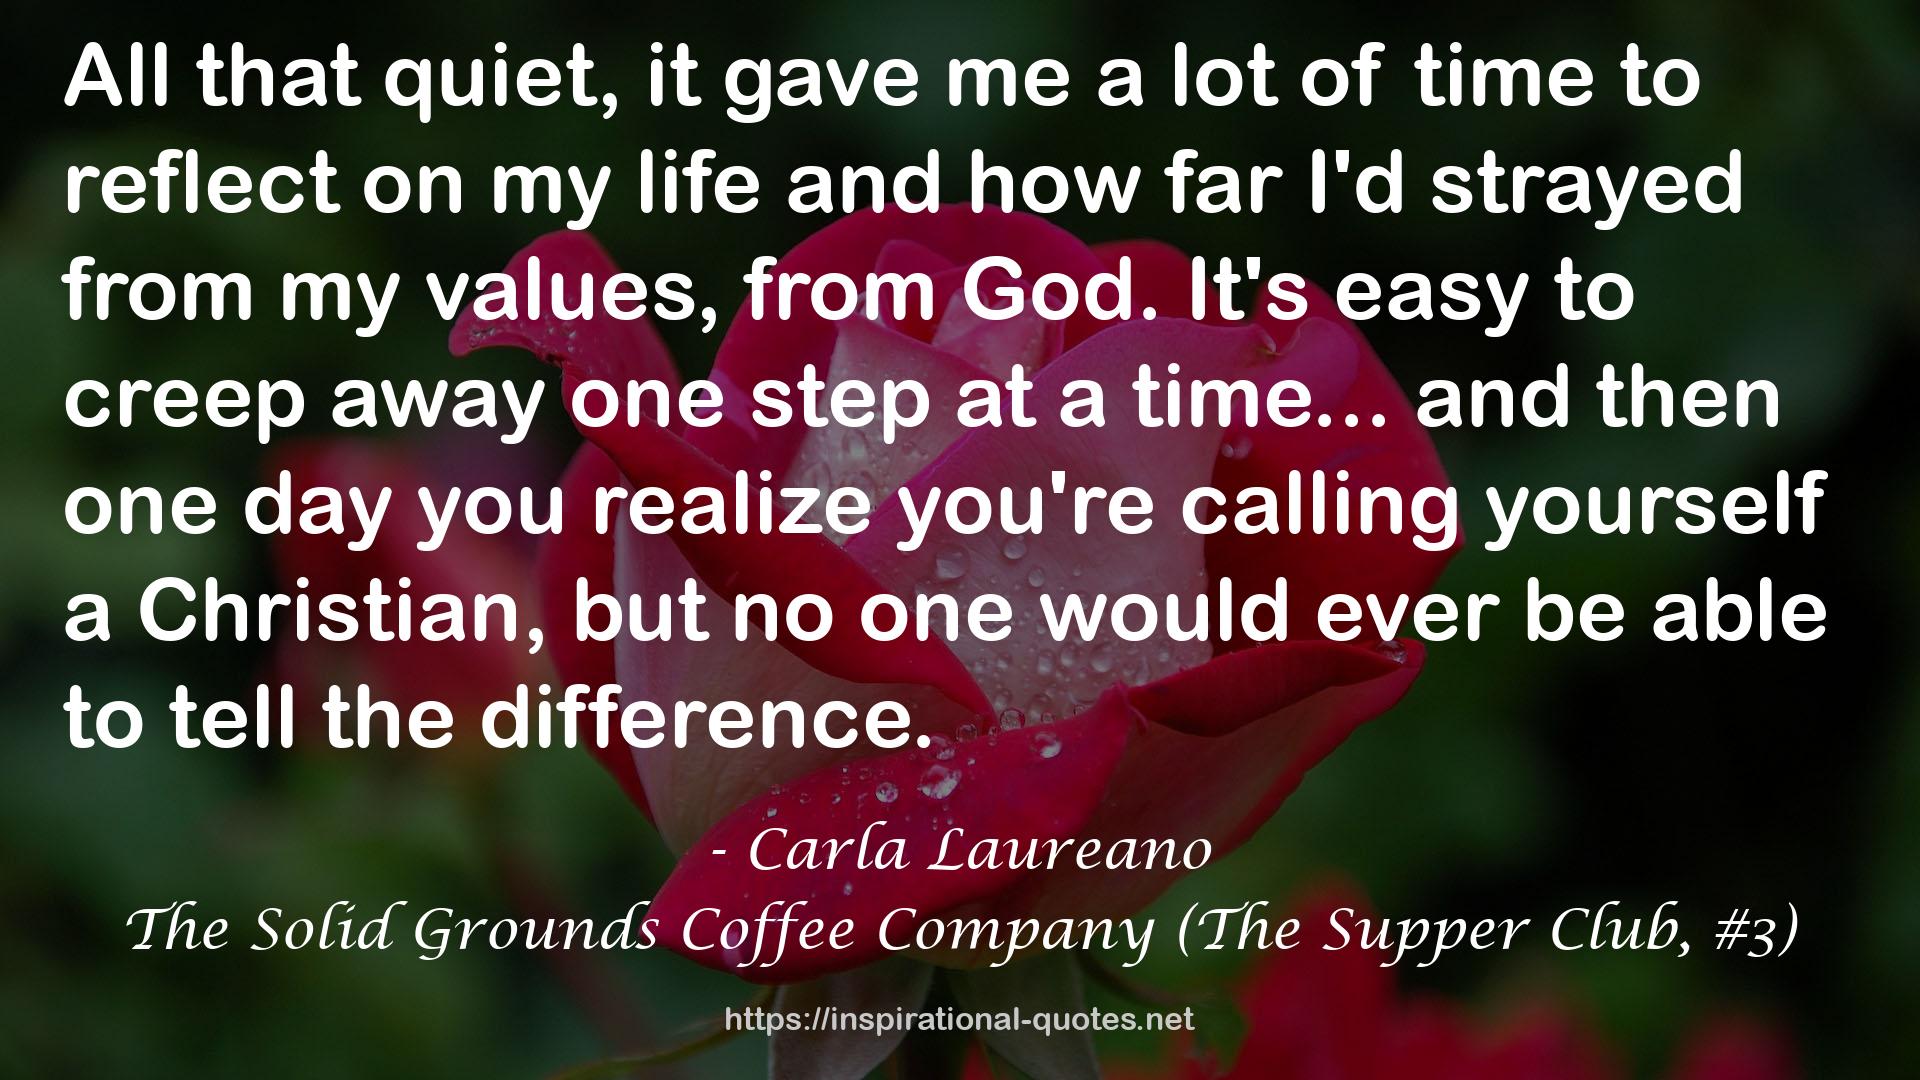 The Solid Grounds Coffee Company (The Supper Club, #3) QUOTES